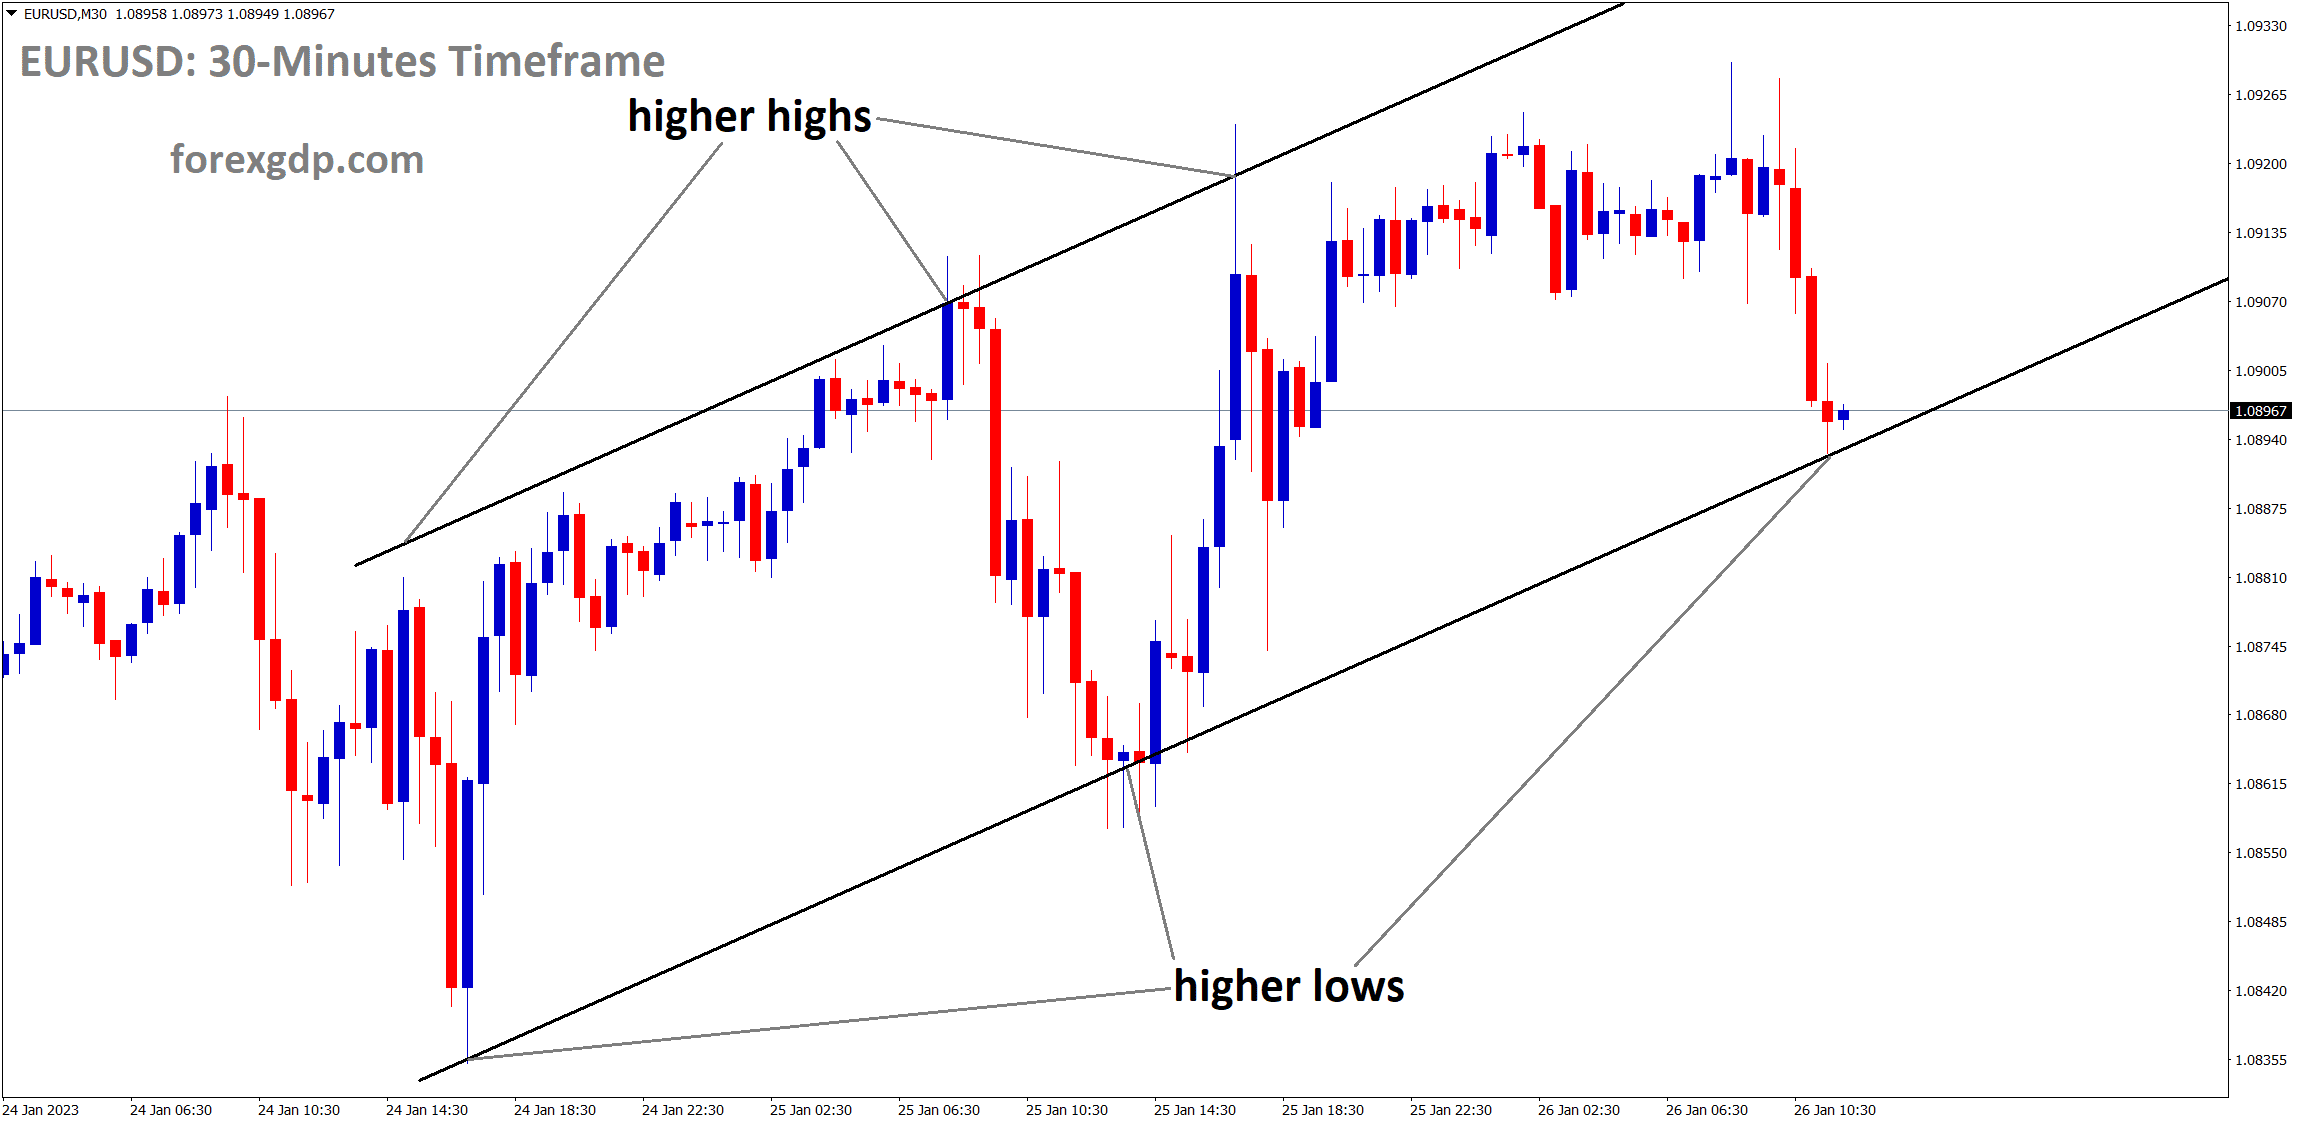 EURUSD is moving in the Ascending Channel and the market has reached the higher low area of the channel.